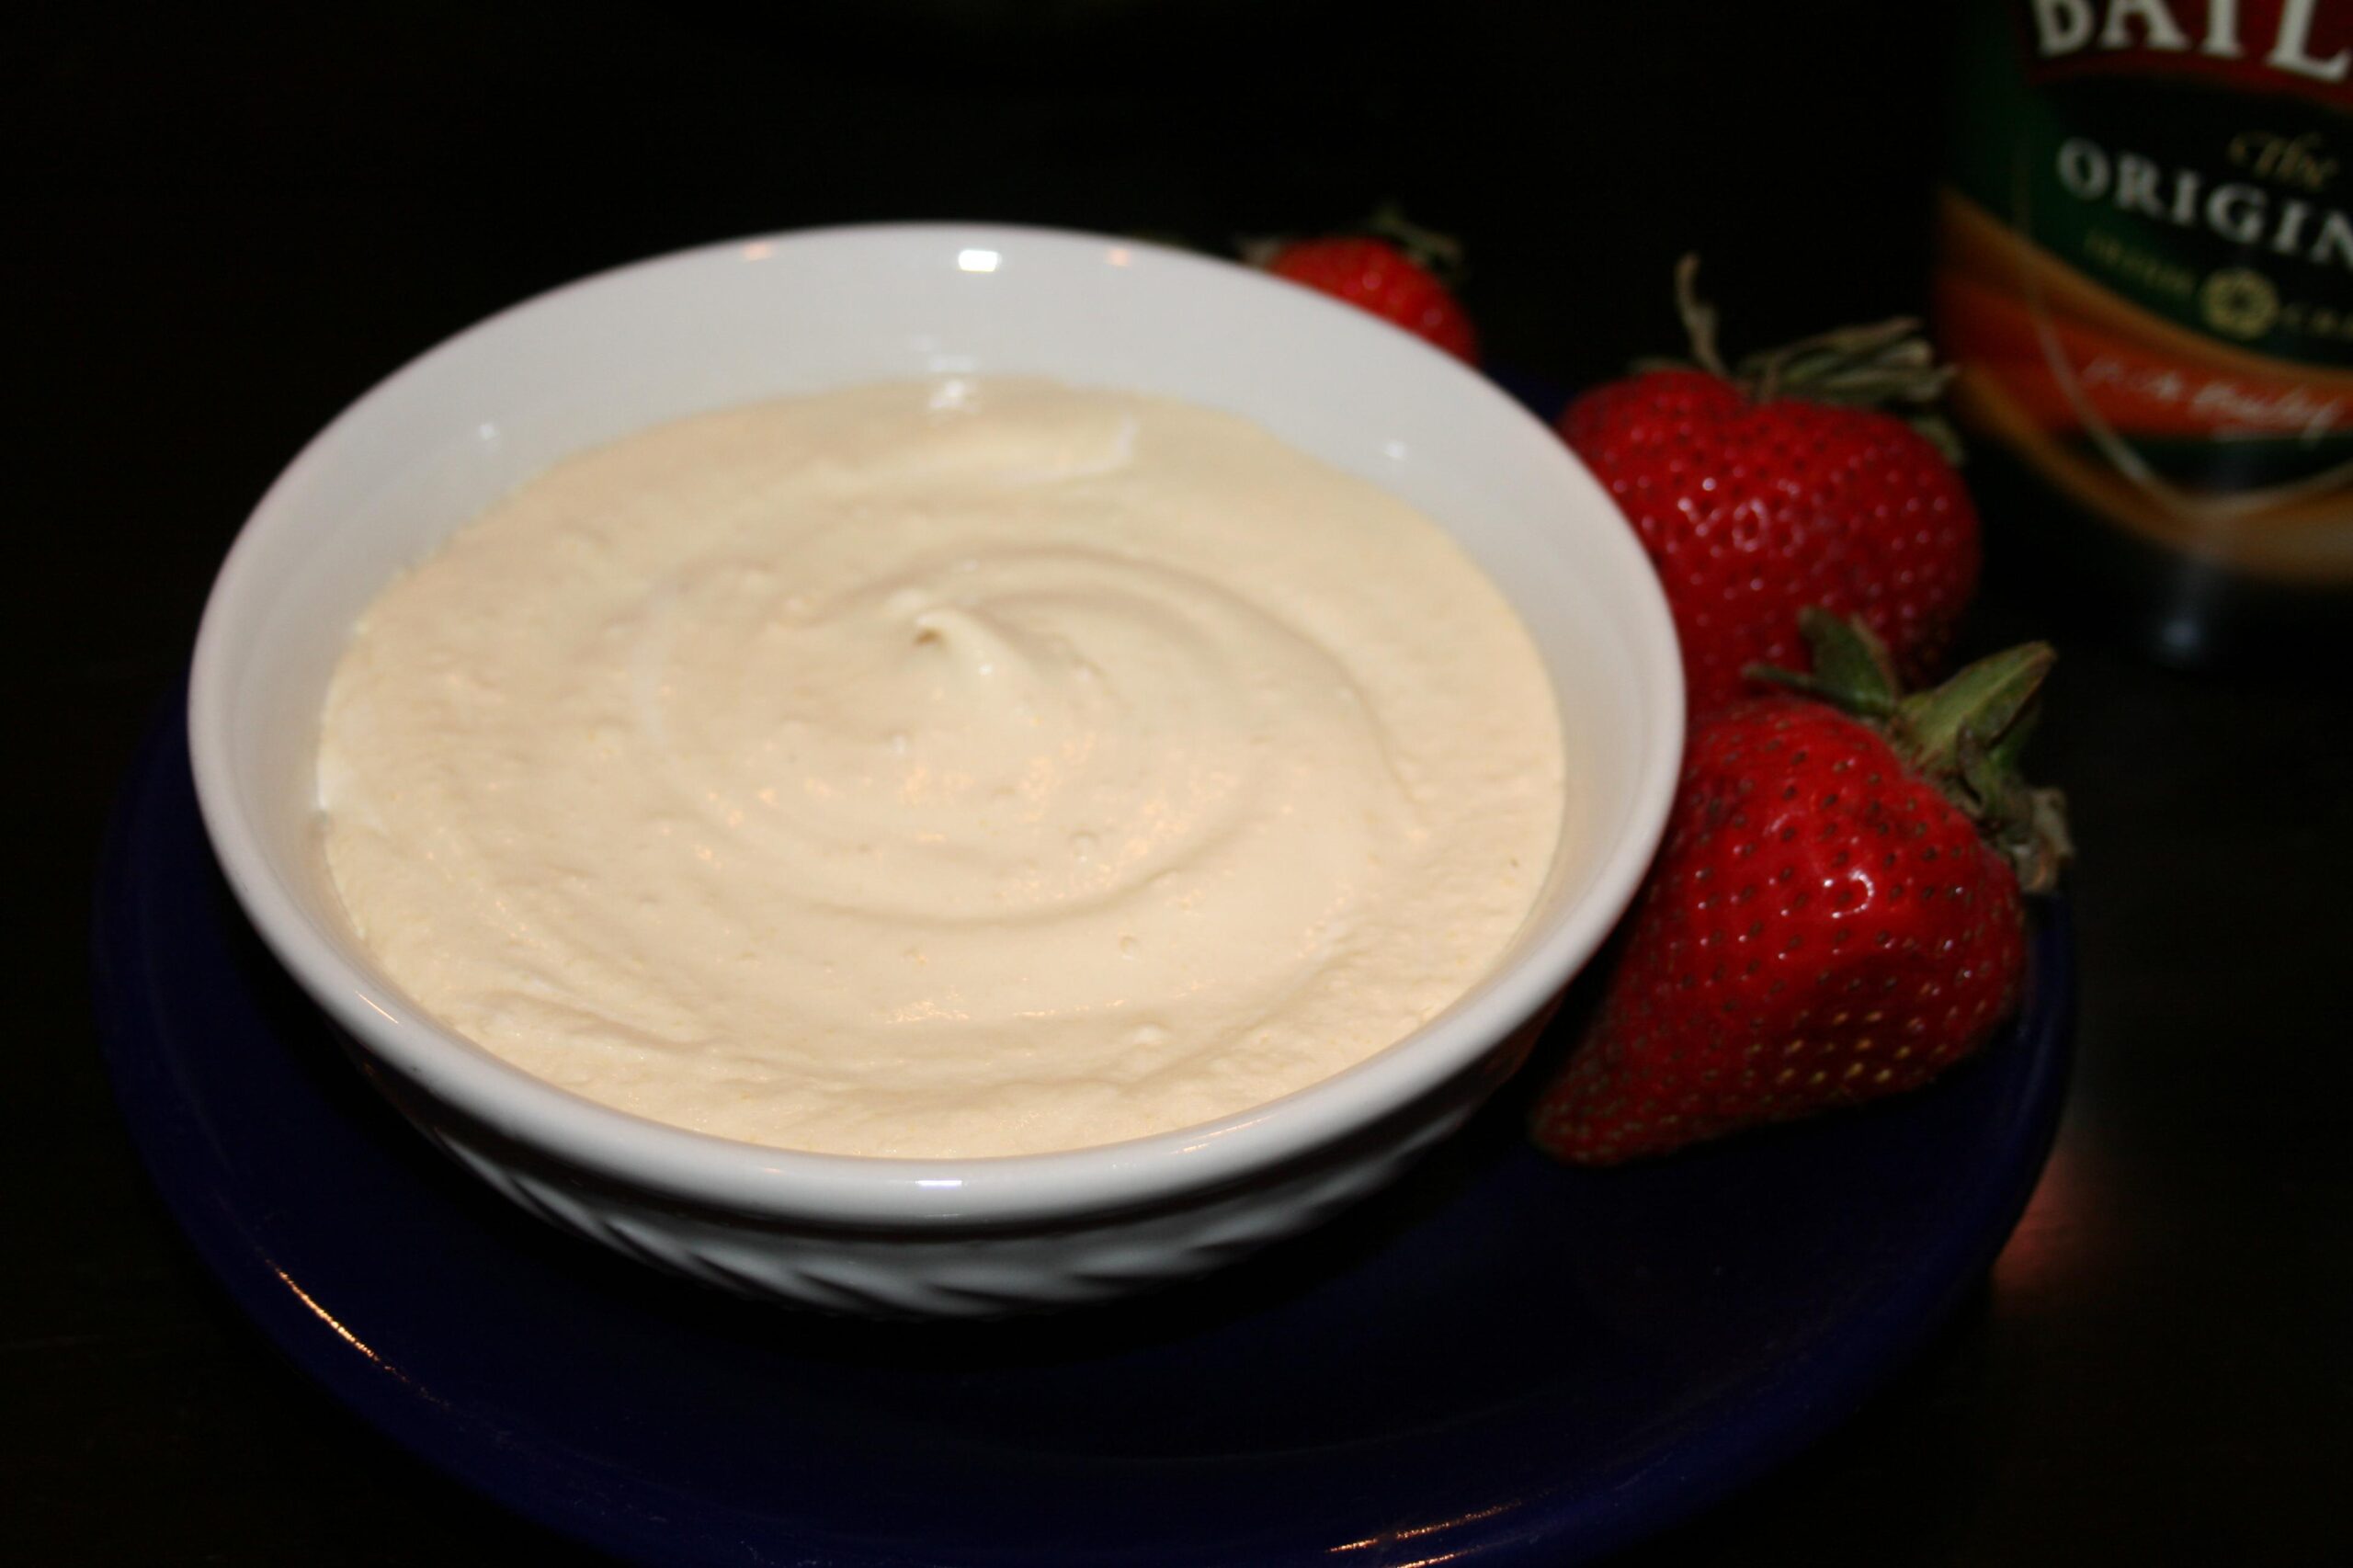  Fruity flavors meet velvety smoothness with this dip.